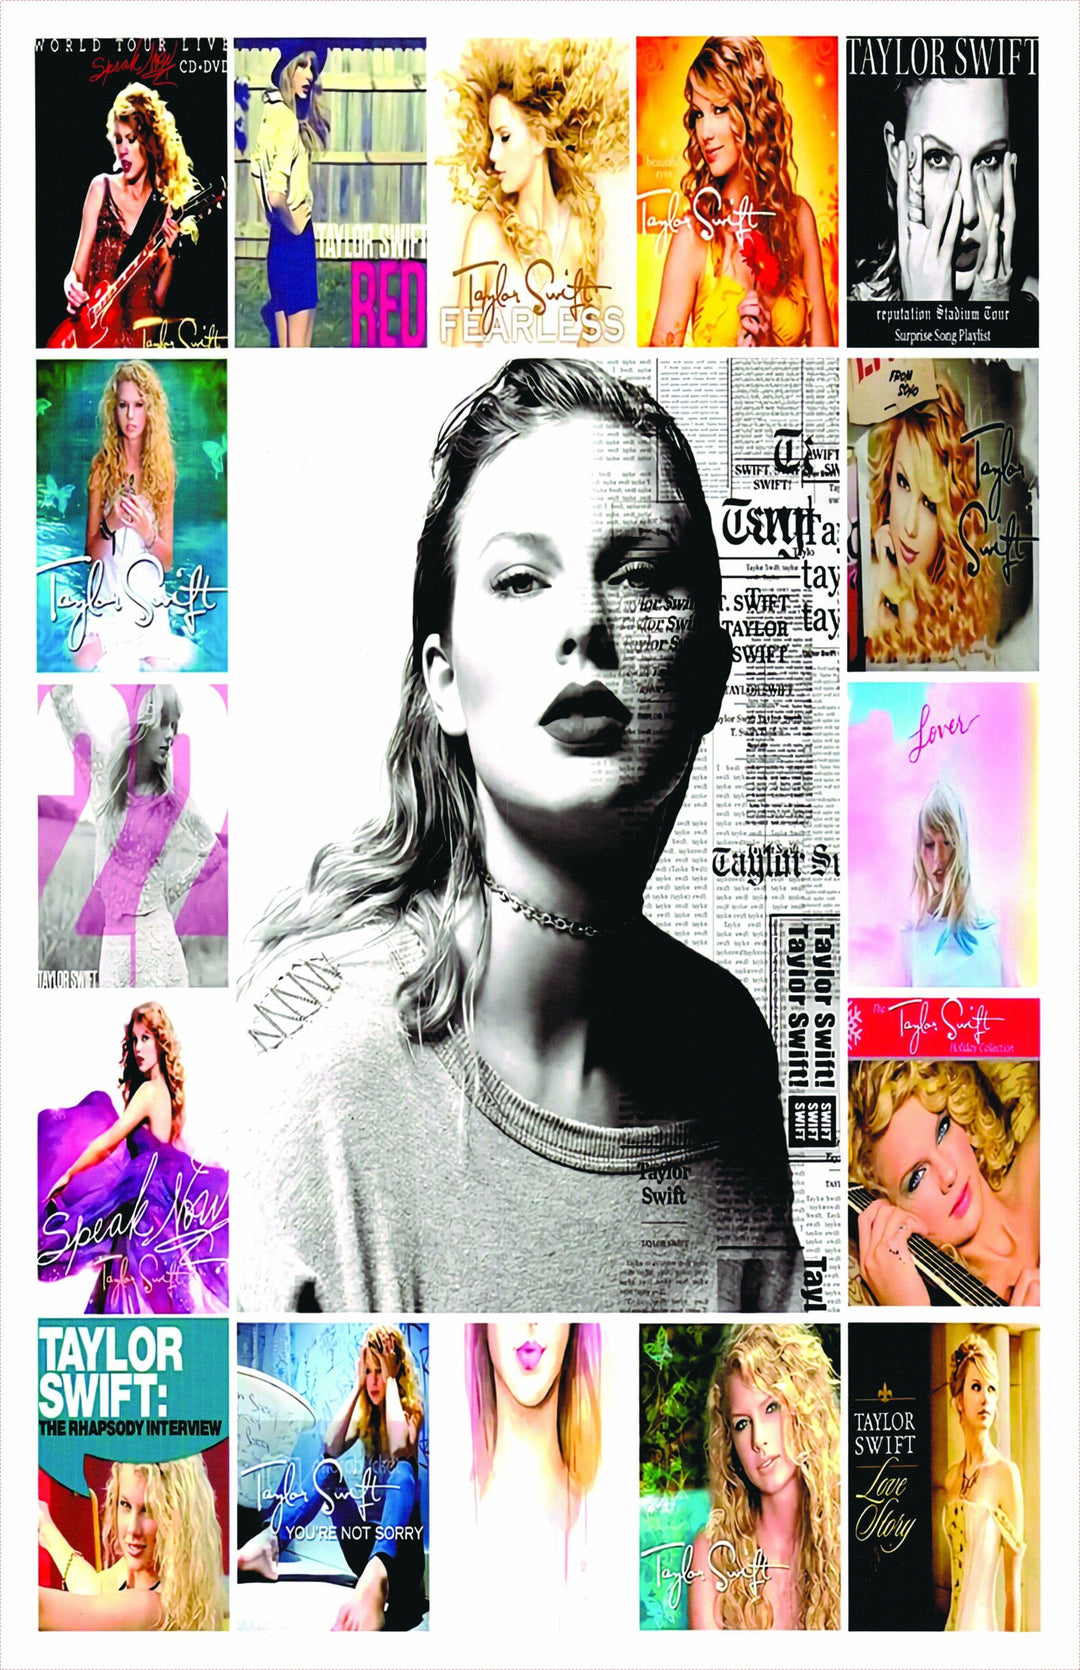 Taylor Swift Collage 1 Poster